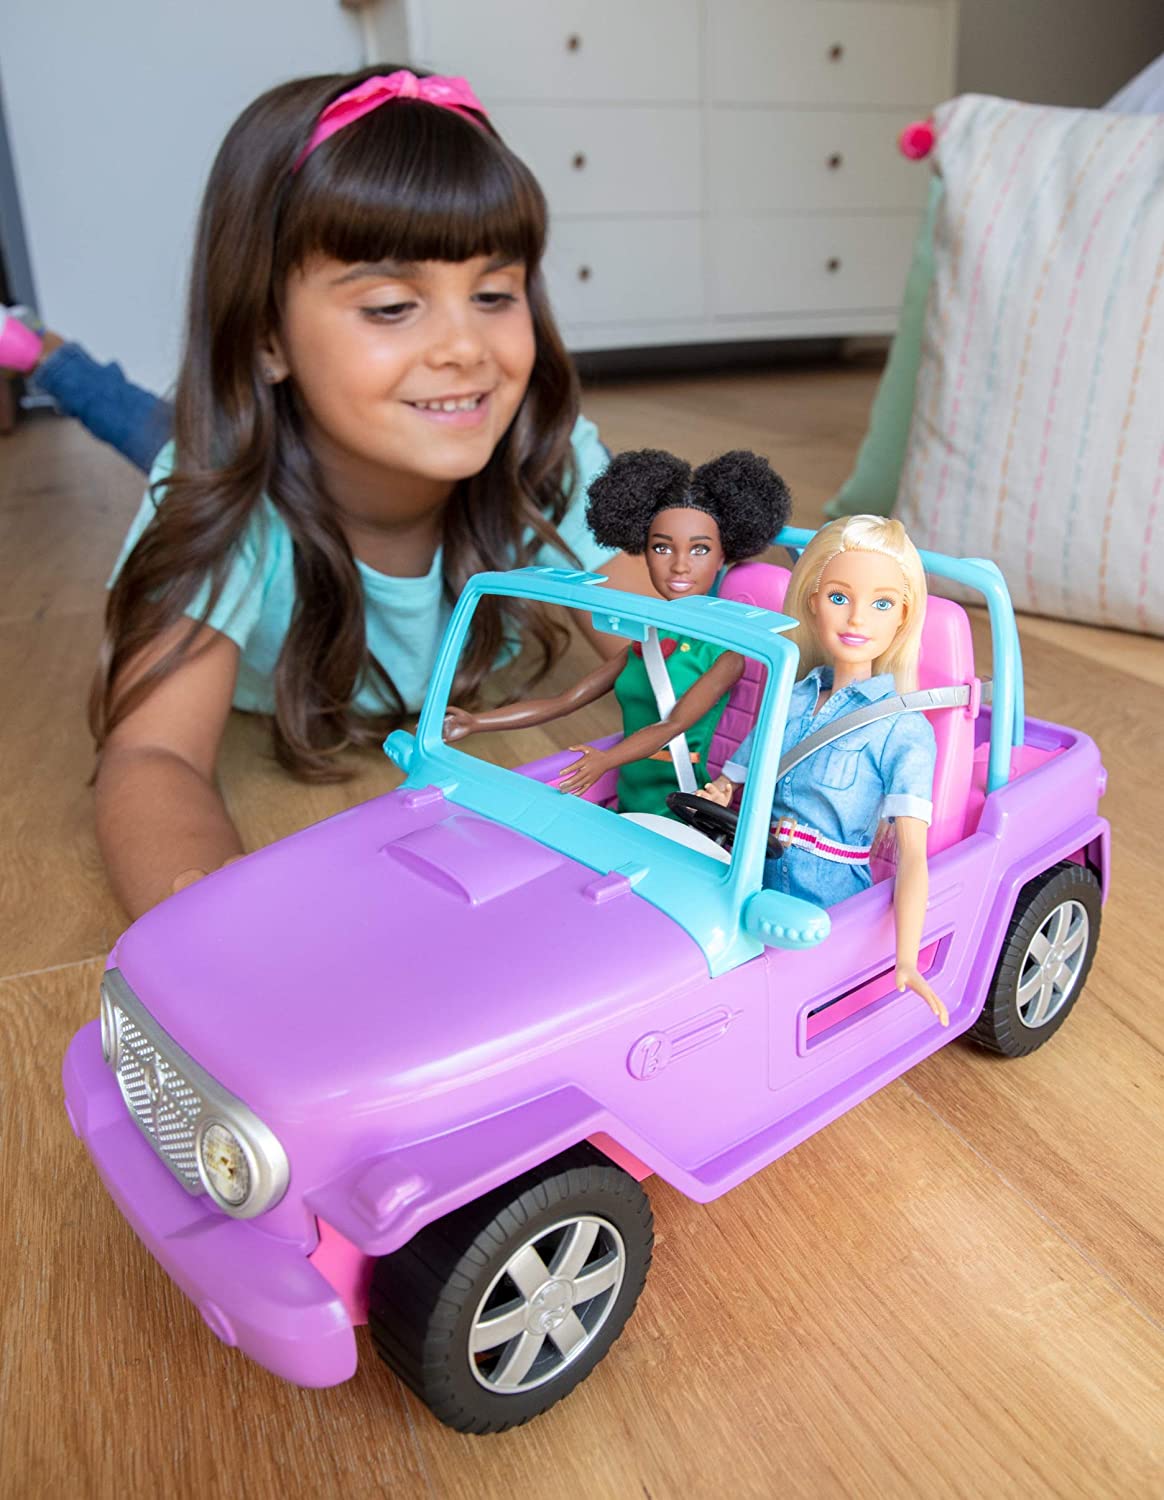 Barbie Off-Road Vehicle with Rolling Wheels - Girls RC Vehicle/Car Toy